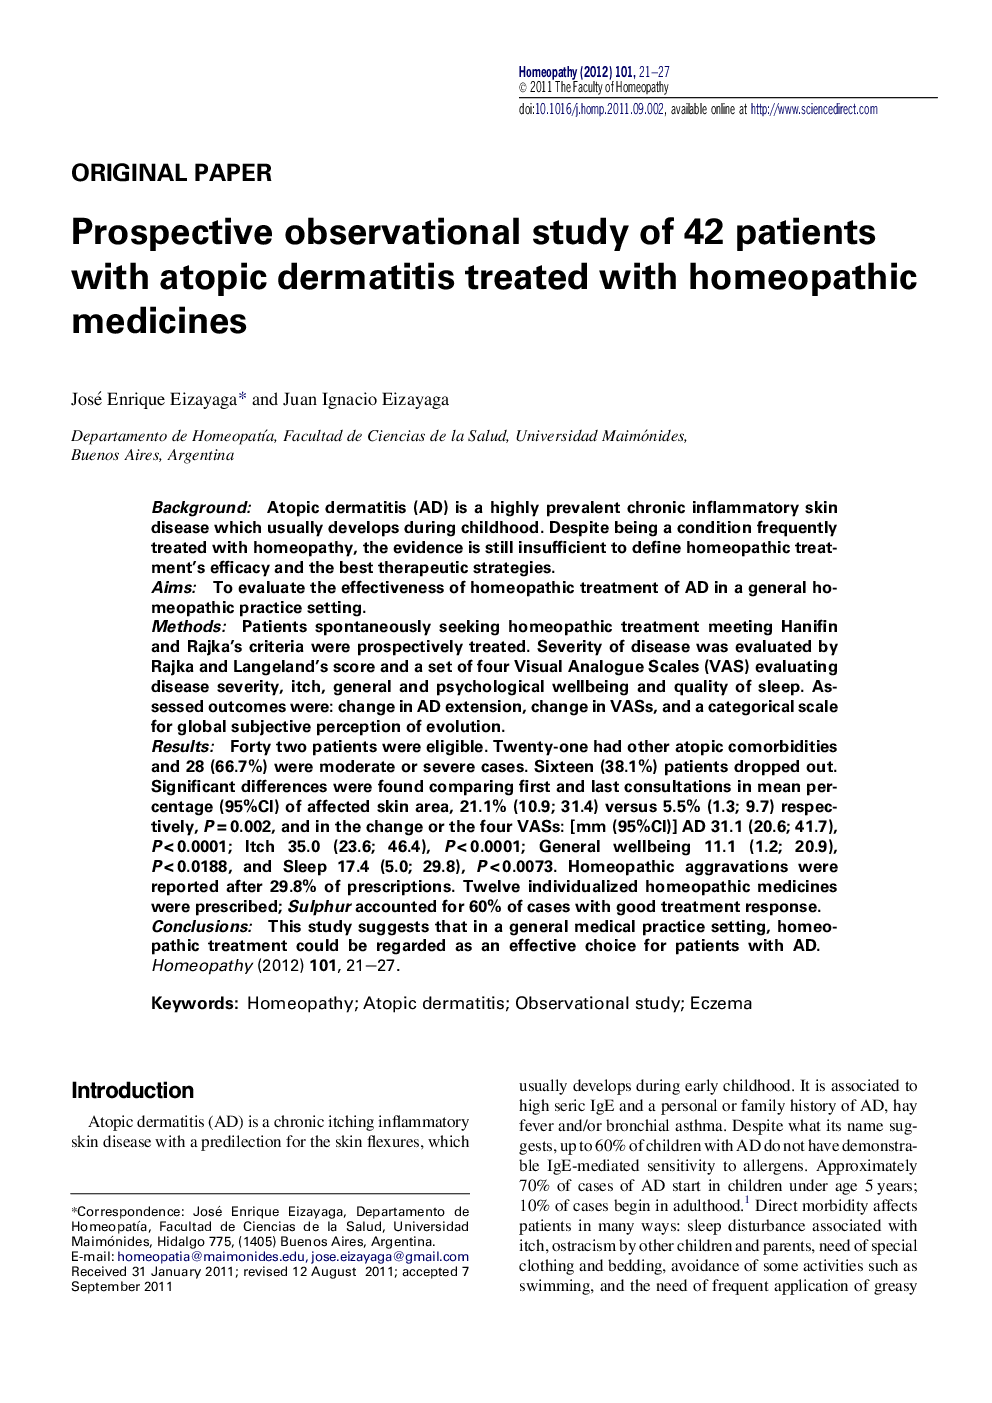 Prospective observational study of 42 patients with atopic dermatitis treated with homeopathic medicines